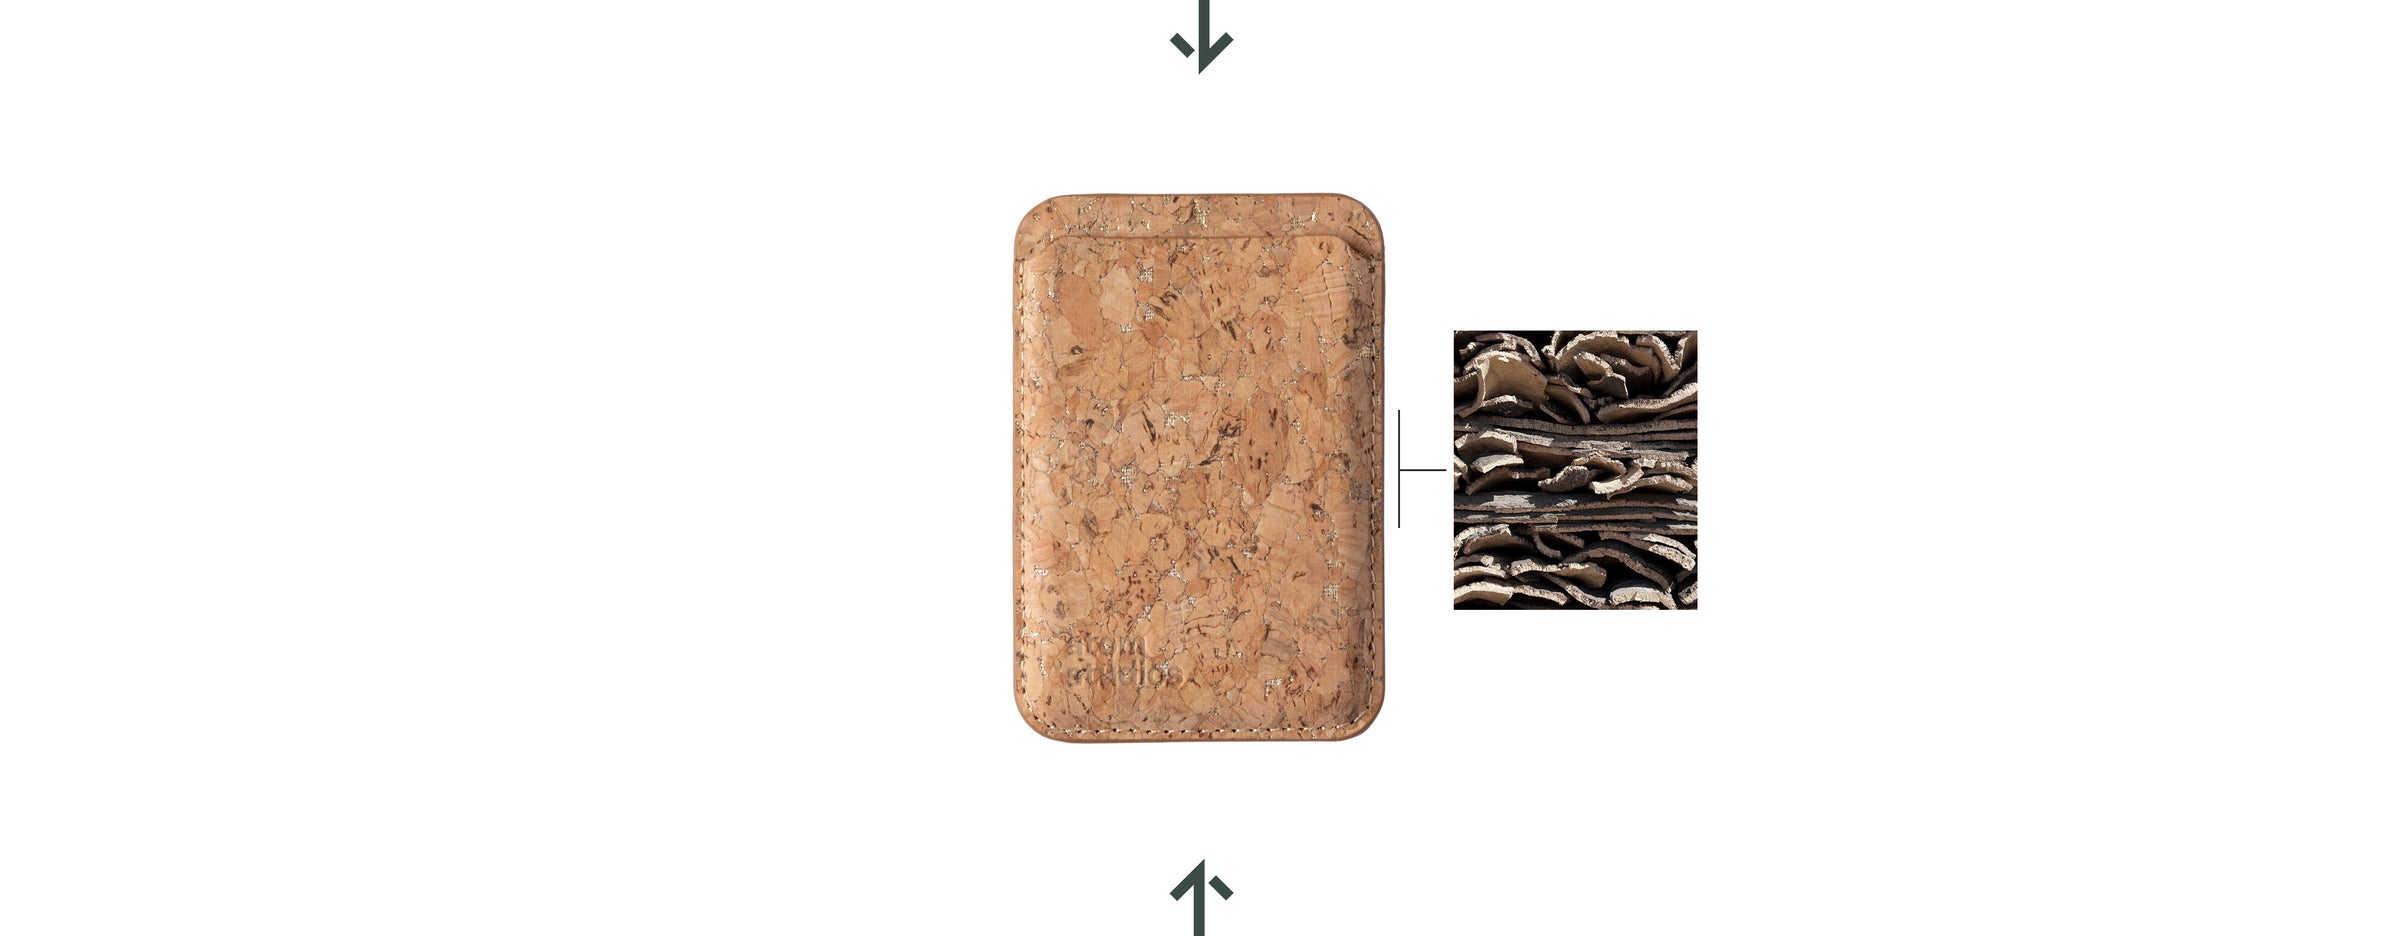 Sustainable eco raw cork. High quality eco materials. Long lasting durable natural plant-based cork. Naturally antibacterial. Vegan card wallet.